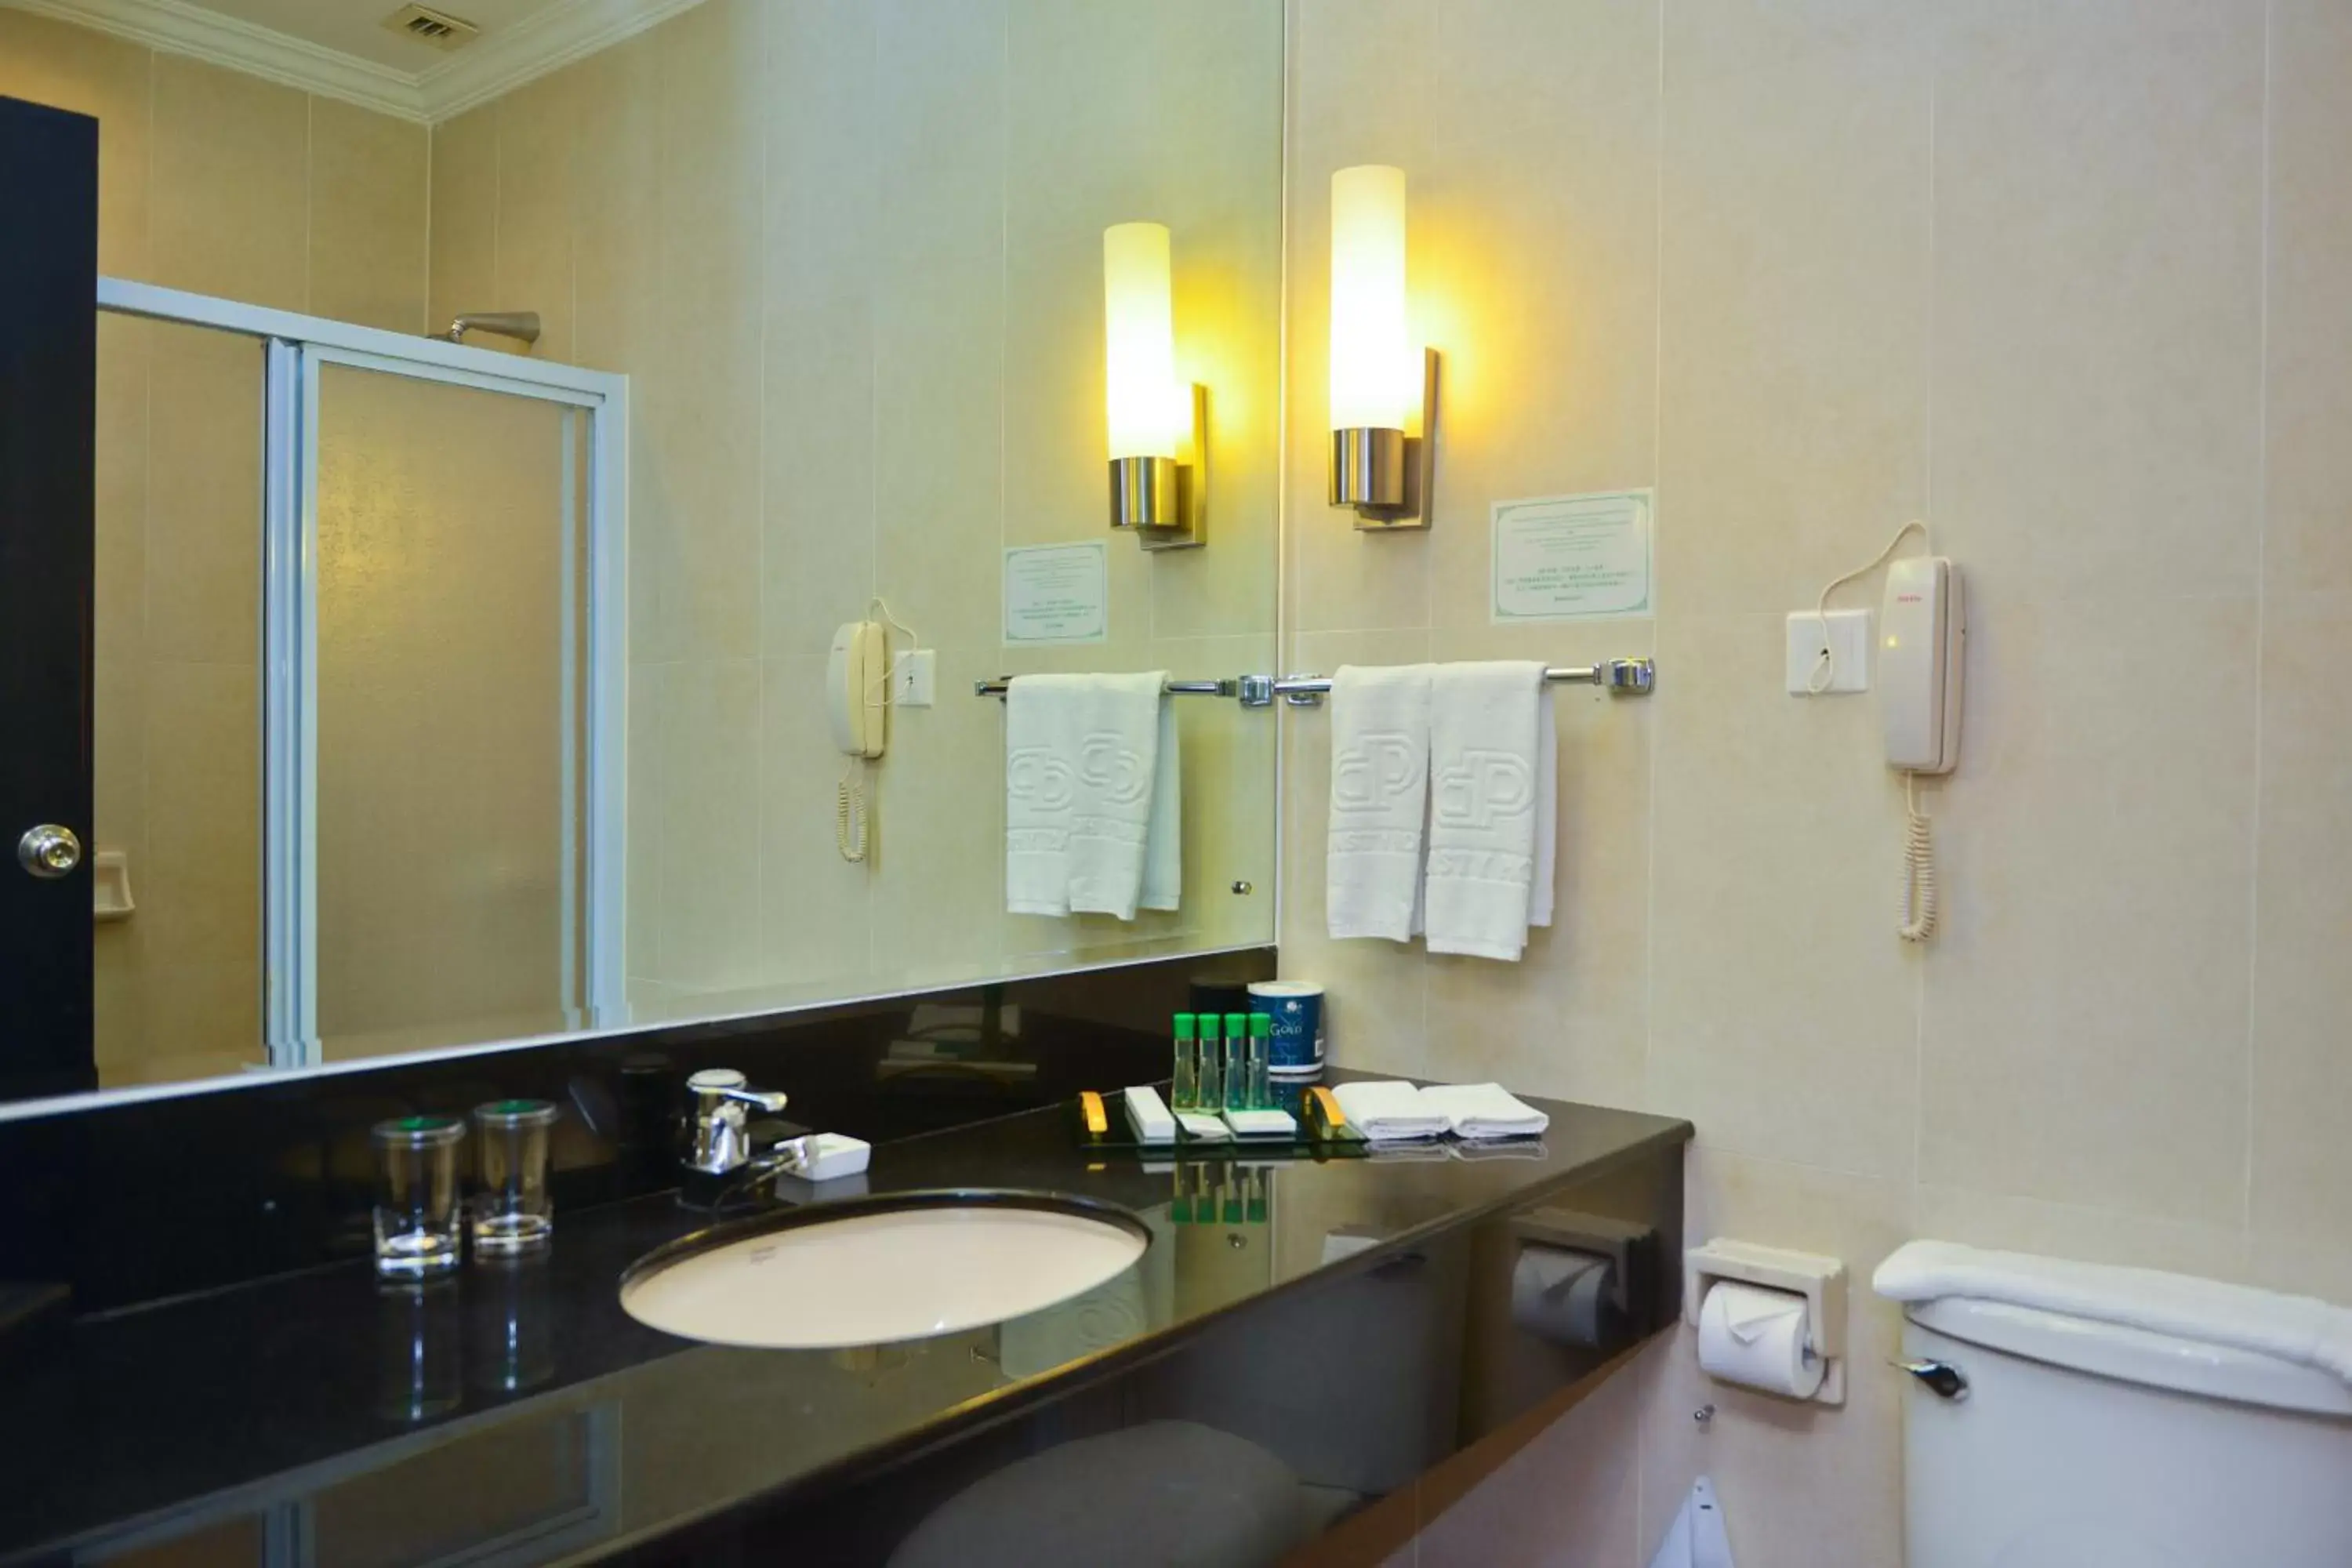 Executive Deluxe Double Room in Dynasty Hotel Miri